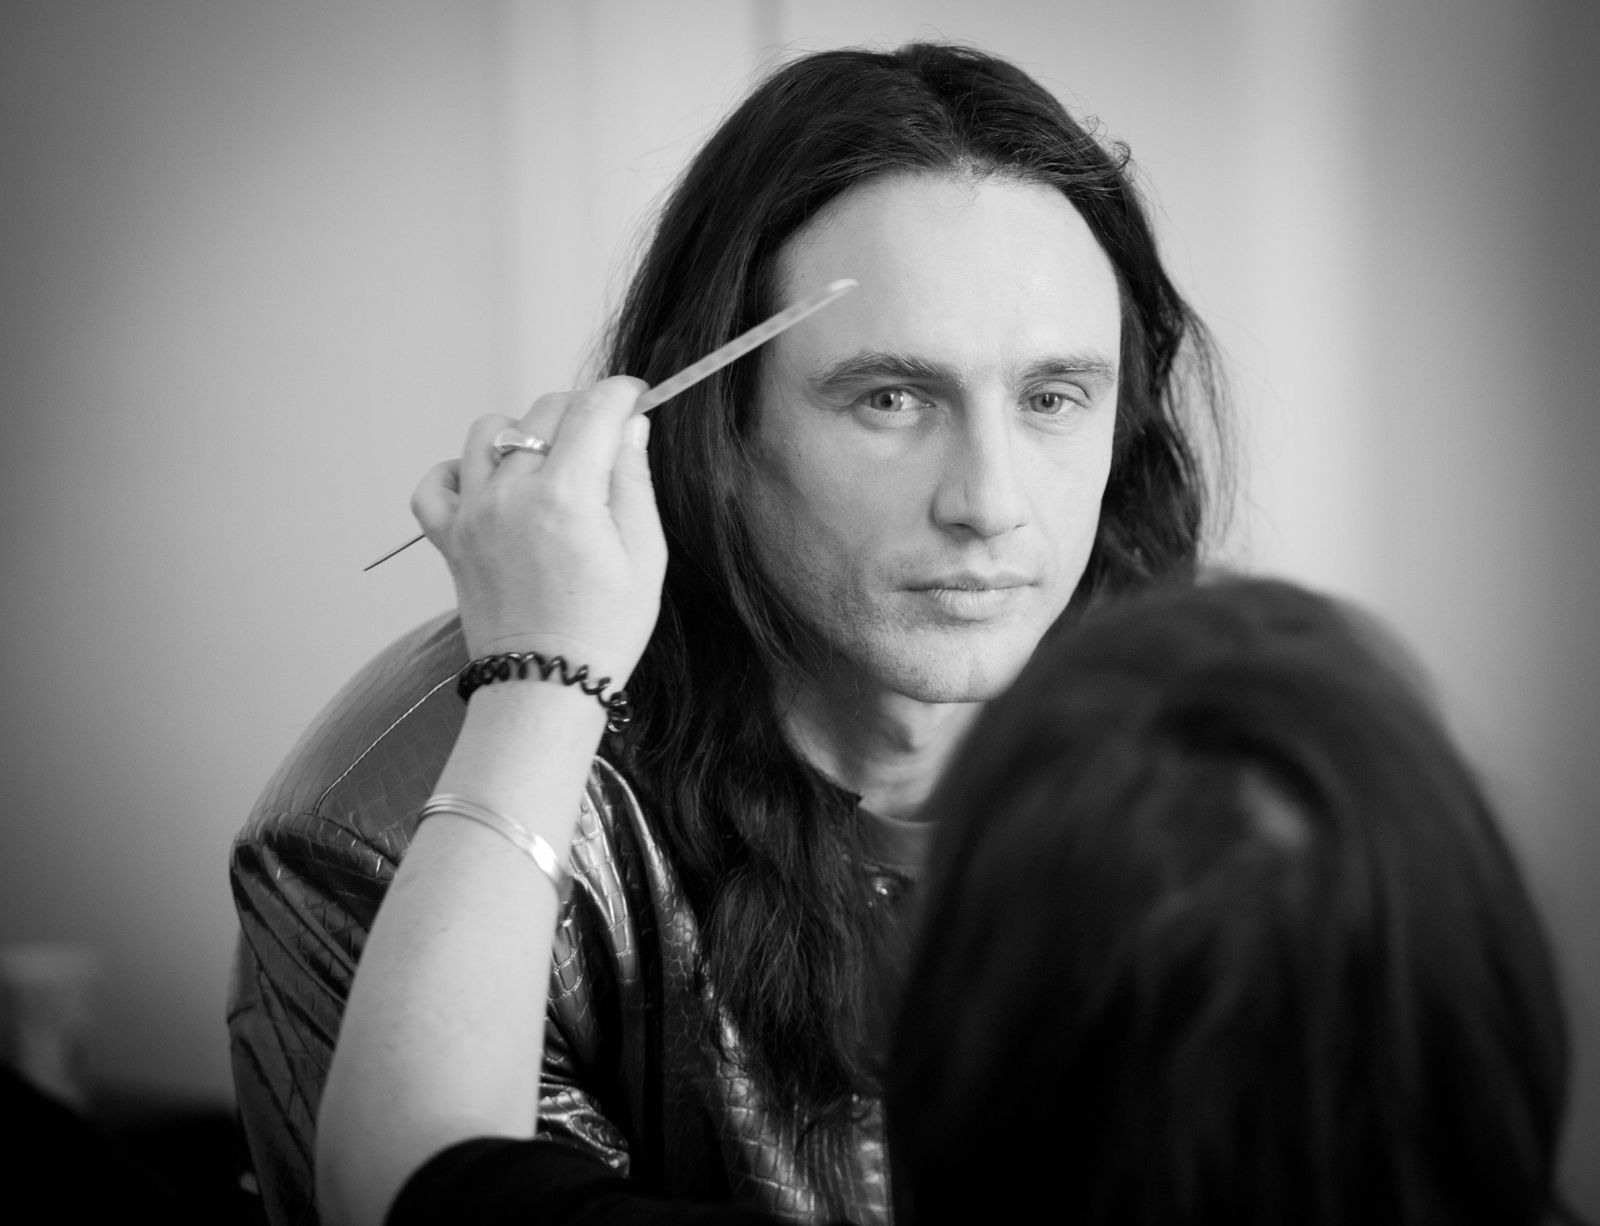 James Franco on the set of The Disaster Artist